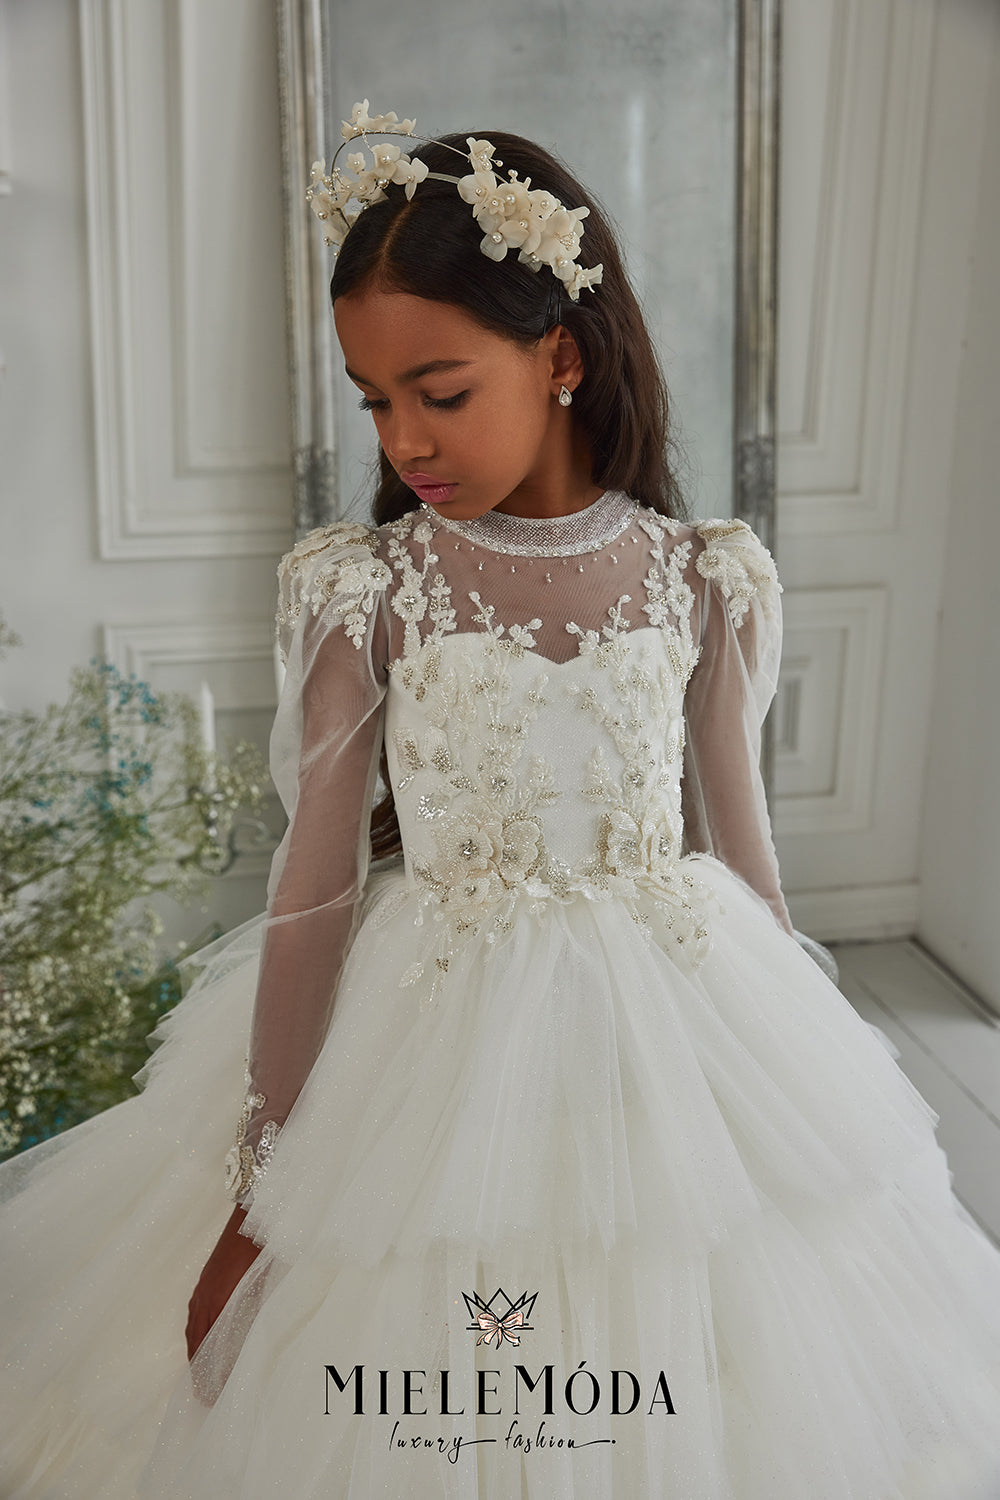 Modern Arabic Kids Pageant Dress With Barbie Crystal Flower, Cap Sleeves,  And Cute White First Holy Communion Design From Langju22, $44.36 |  DHgate.Com